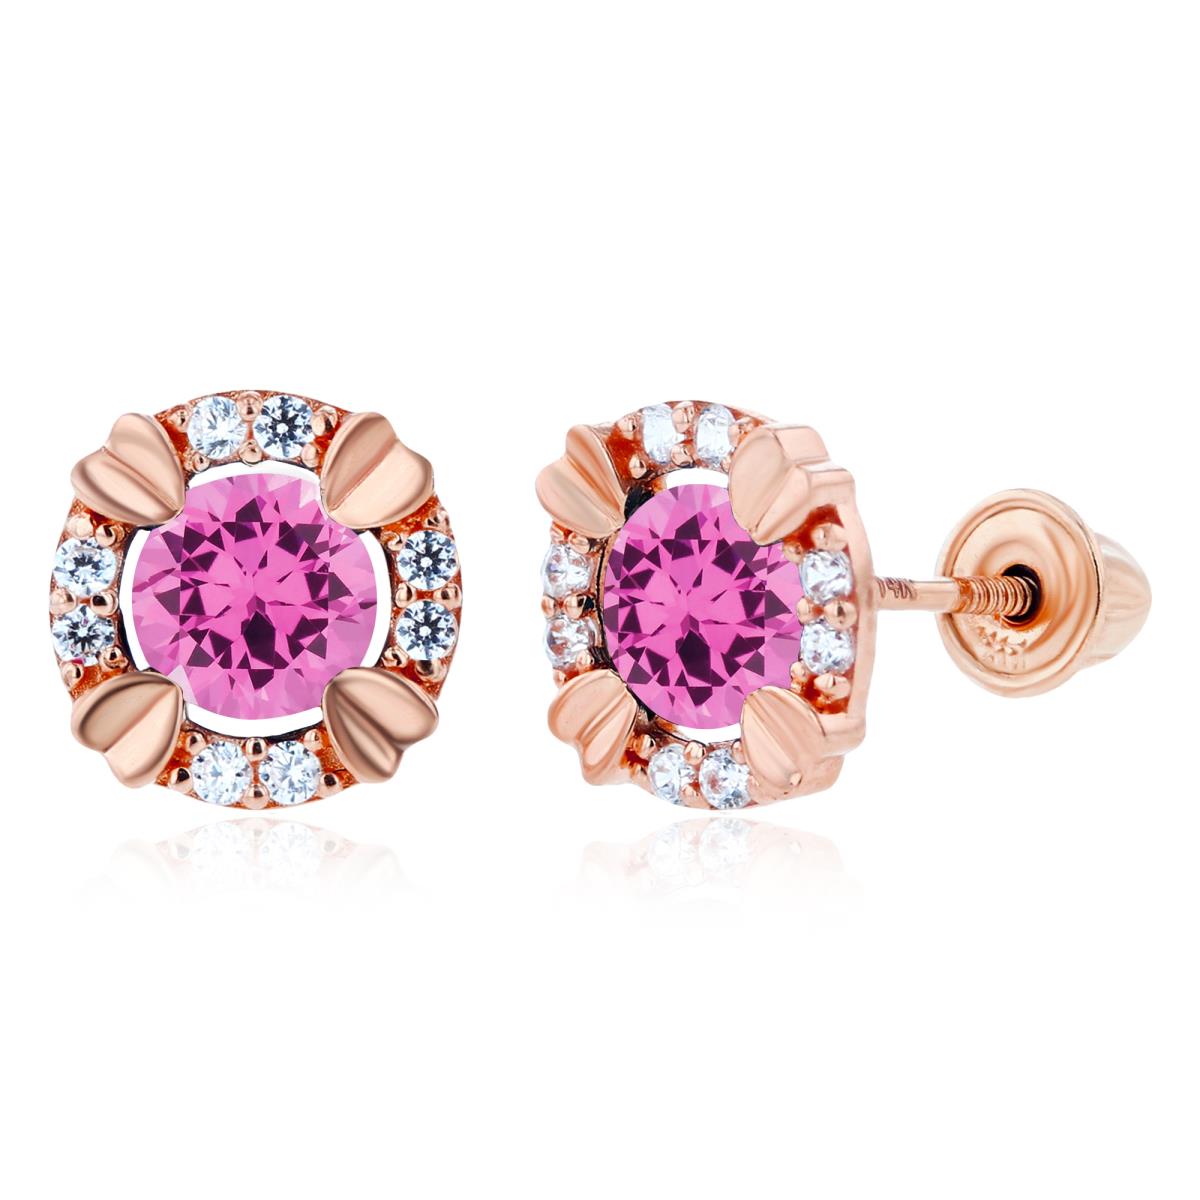 14K Rose Gold 4mm Round Created Pink Sapphire & 1mm Created White Sapphire Halo Screwback Earrings